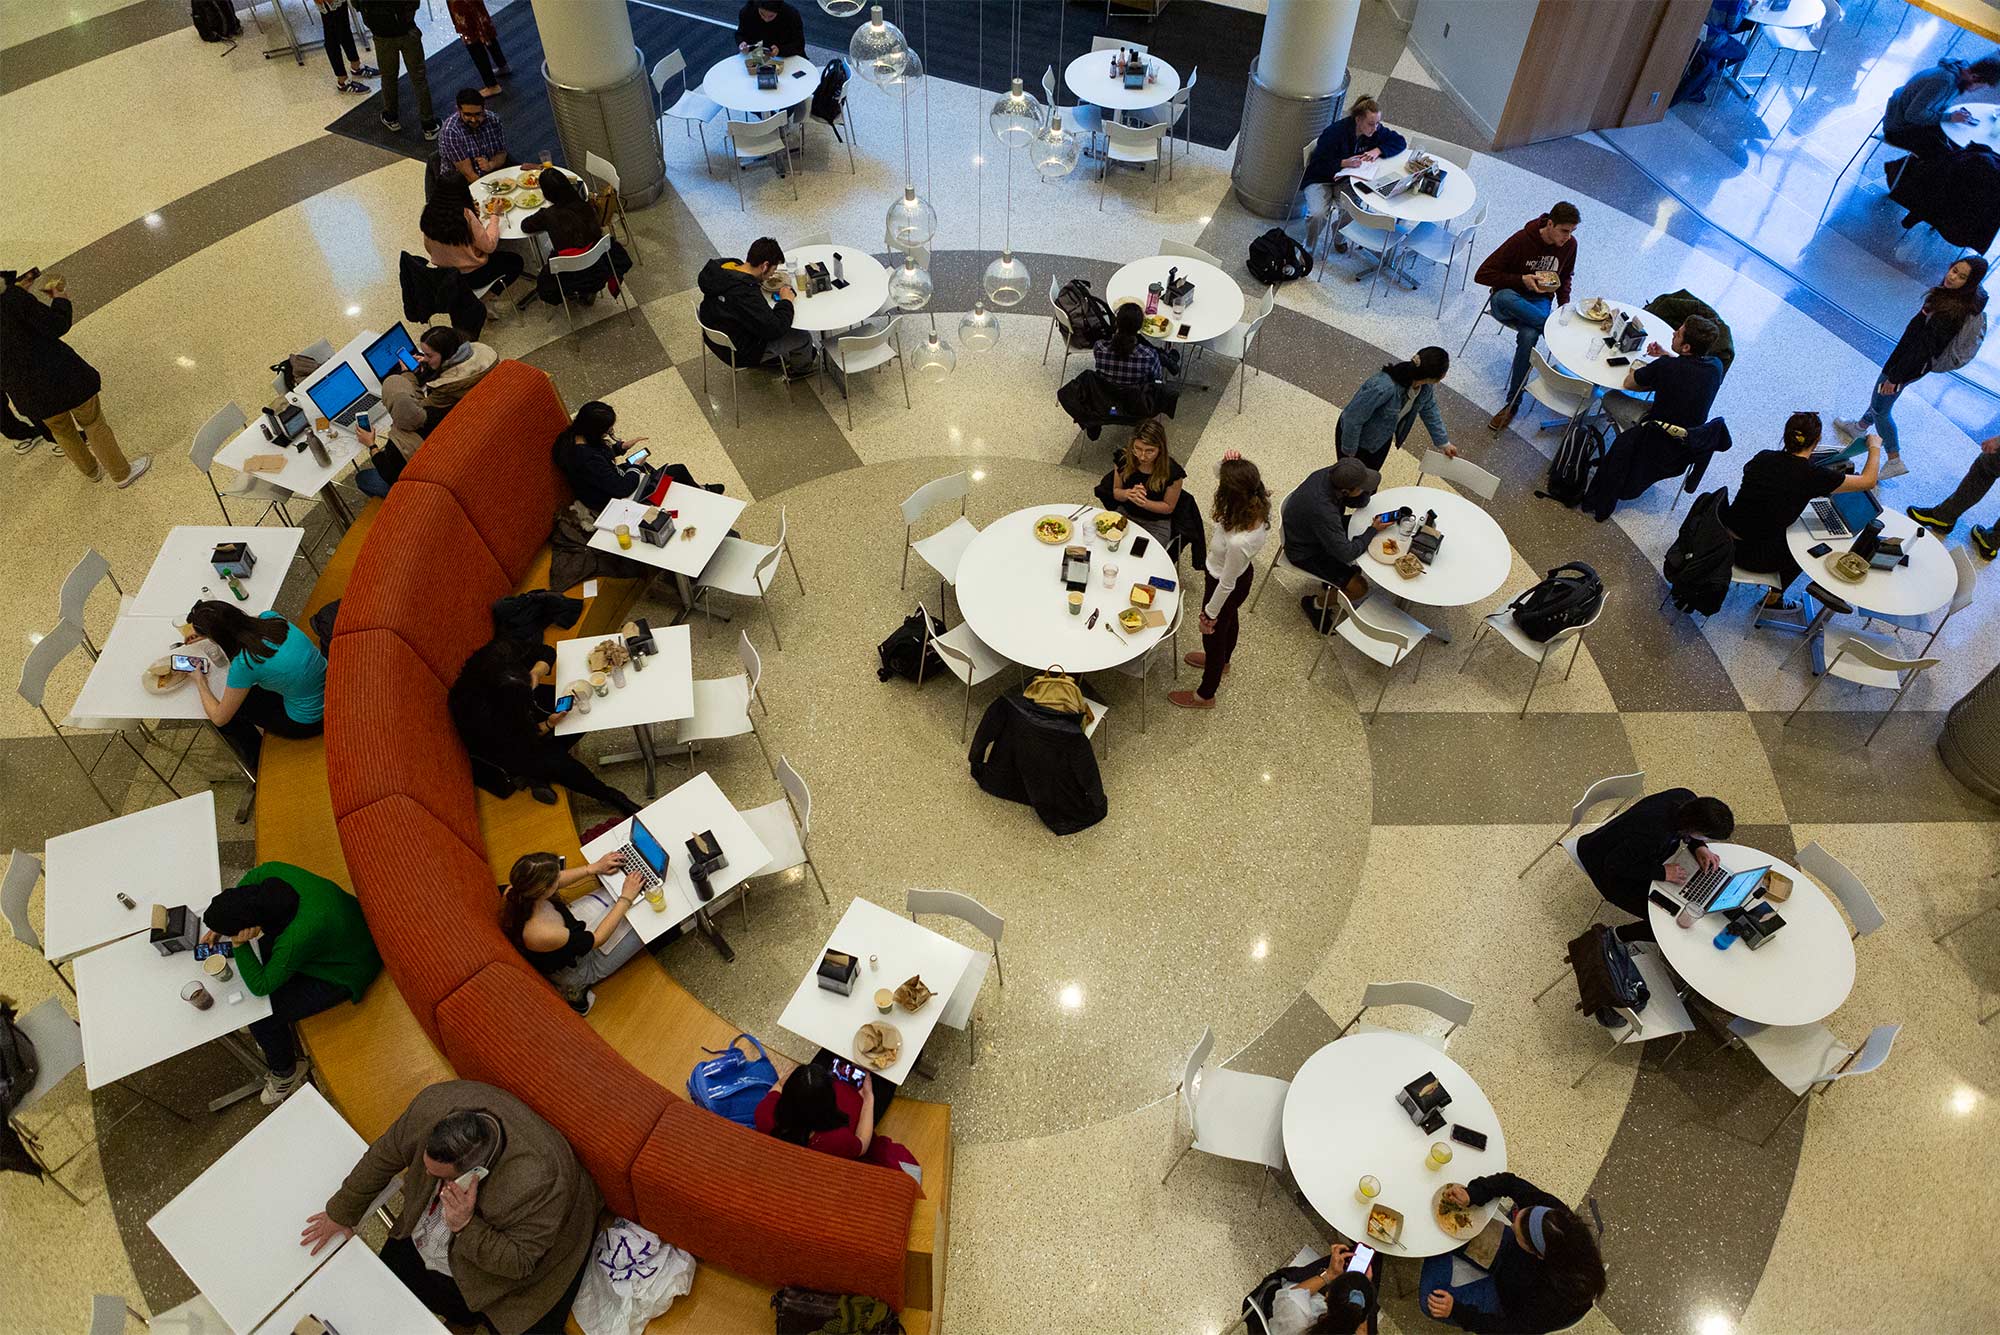 Students eat and study at the Marciano Commons dining hall, Boston University Center for Student Services.